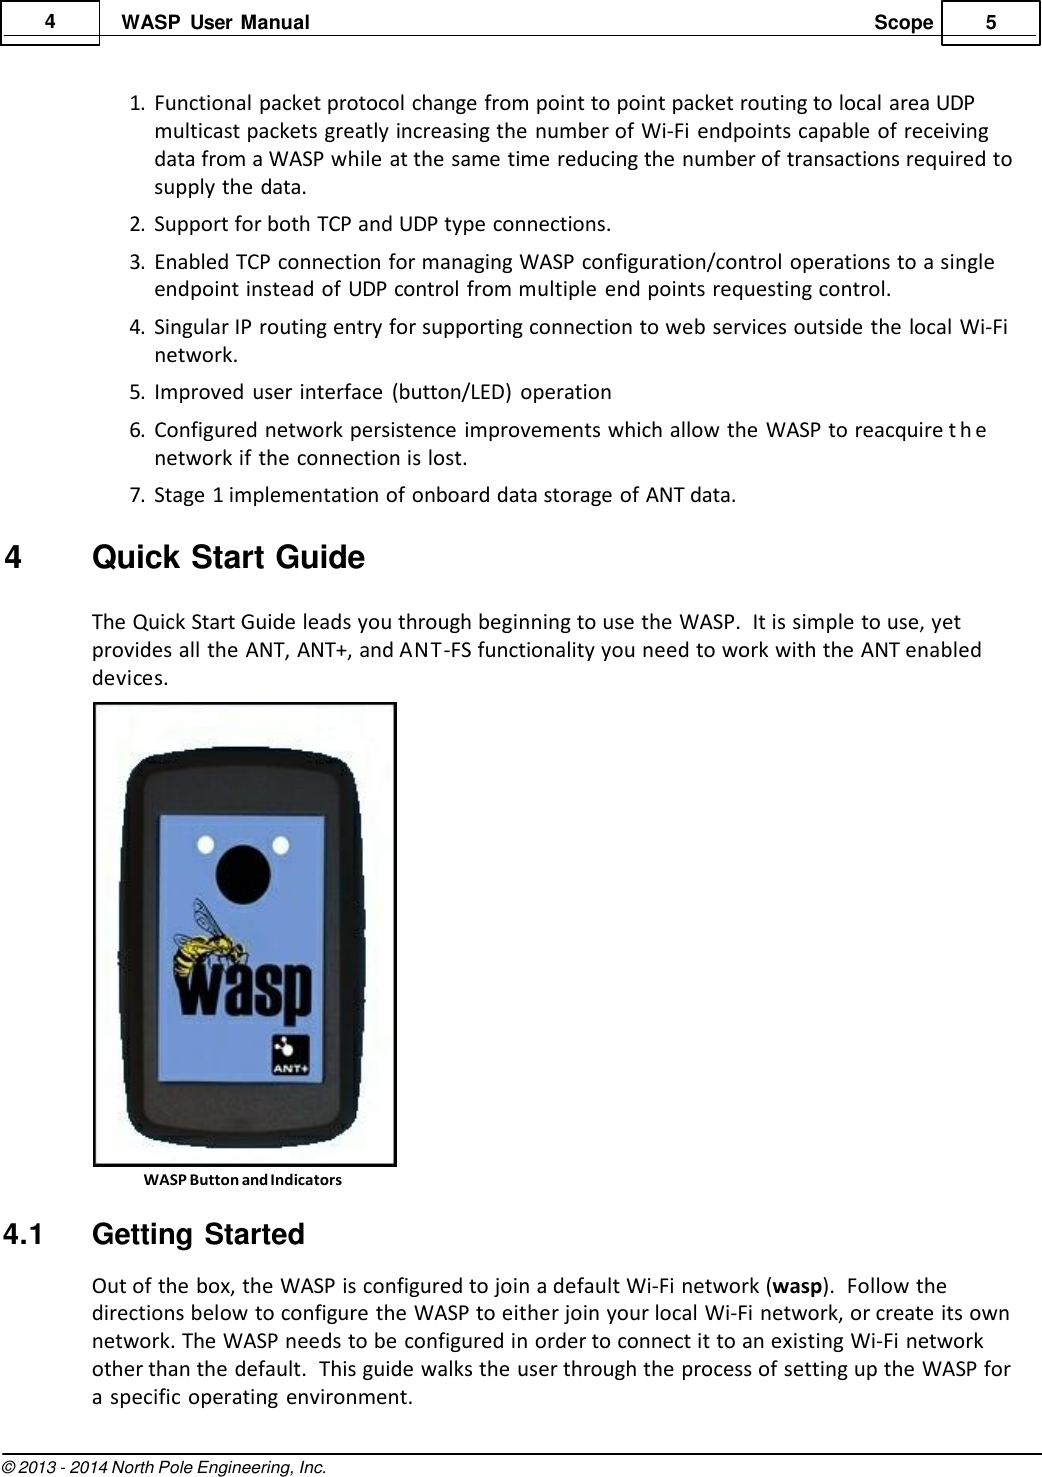 © 2013 - 2014 North Pole Engineering, Inc. Scope 5    4 WASP  User Manual   1. Functional packet protocol change from point to point packet routing to local area UDP multicast packets greatly increasing the  number of Wi-Fi endpoints capable of receiving data from a WASP while at the same time reducing the number of transactions required to supply the data. 2. Support for both TCP and UDP type connections. 3. Enabled TCP connection for managing WASP configuration/control operations to a single endpoint instead of UDP control from multiple end points requesting control. 4. Singular IP routing entry for supporting connection to web services outside the local Wi-Fi network. 5. Improved  user interface  (button/LED)  operation 6. Configured network persistence improvements which allow the  WASP to reacquire t h e  network if the connection is lost. 7. Stage 1 implementation of onboard data storage of ANT data.  4  Quick Start Guide  The Quick Start Guide leads you through beginning to use the WASP.  It is simple to use, yet provides all the ANT, ANT+, and ANT-FS functionality you need to work with the ANT enabled devices.   WASP Button and Indicators  4.1  Getting Started Out of the box, the WASP is configured to join a default Wi-Fi network (wasp).  Follow the directions below to configure the WASP to either join your local Wi-Fi network, or create its own network. The WASP needs to be configured in order to connect it to an existing Wi-Fi network other than the default.  This guide walks the user through the process of setting up the WASP for a specific operating environment. 